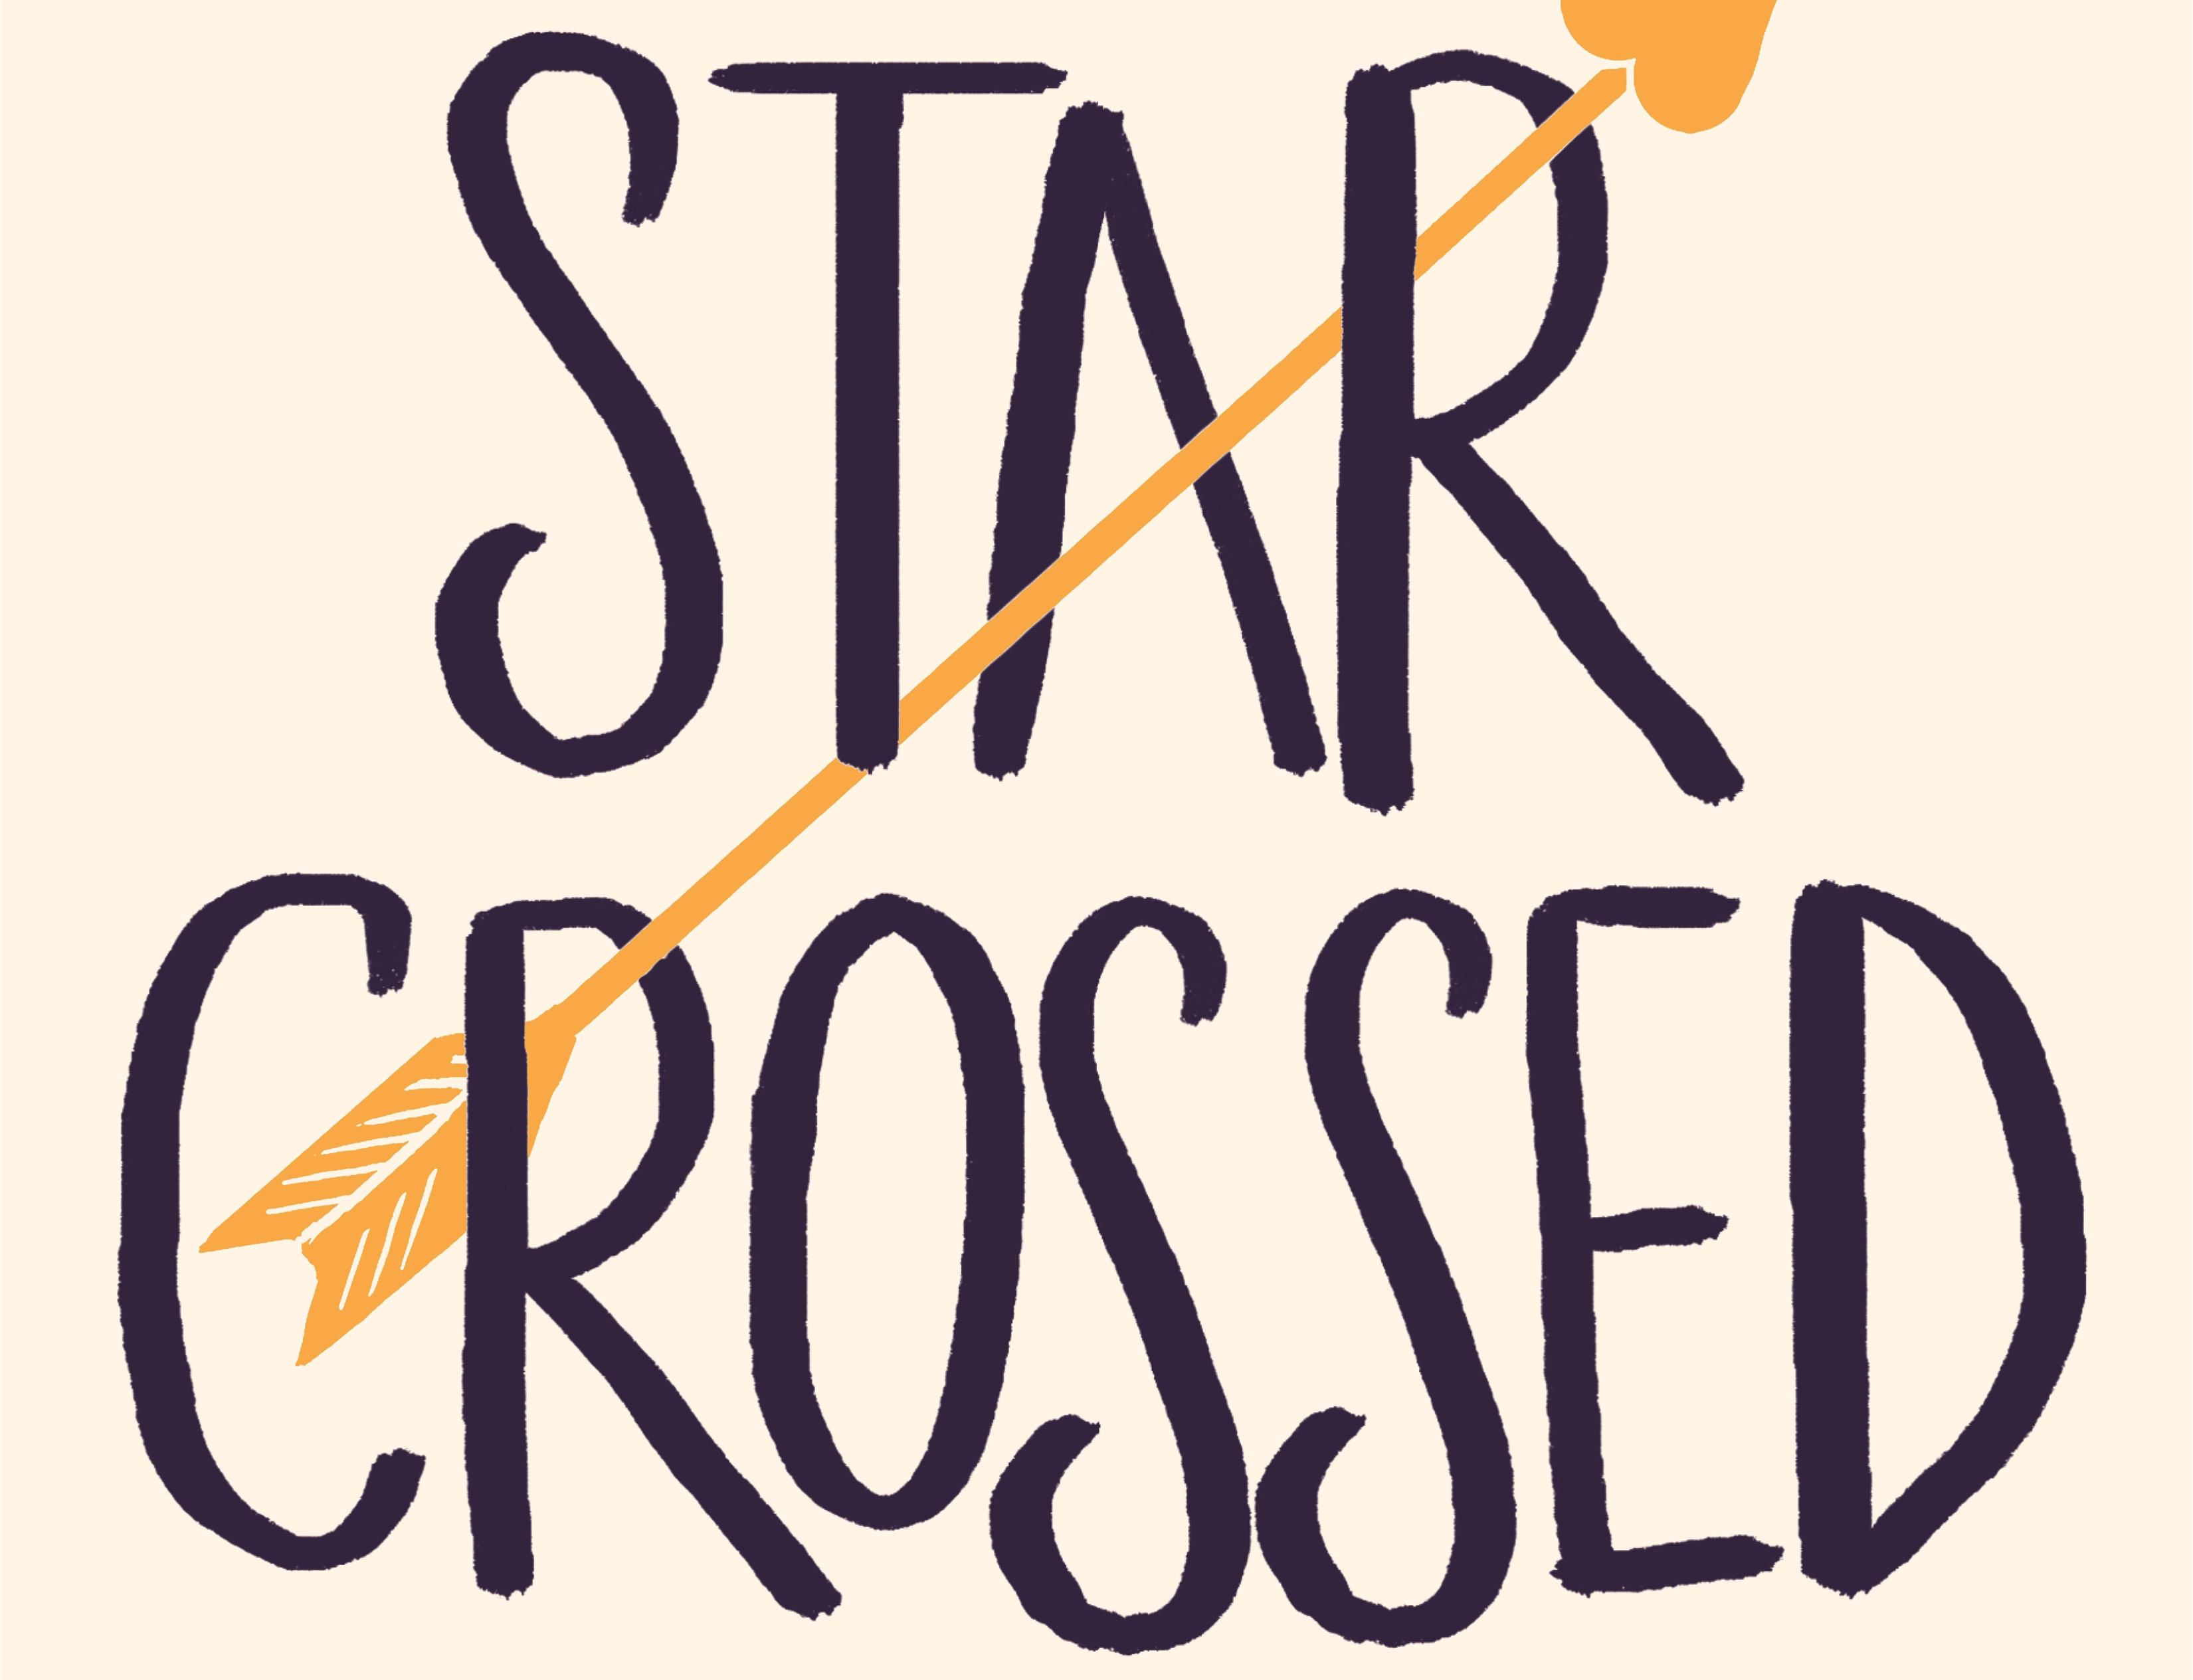 cover of the book "Star-crossed"  by Minnie Darke